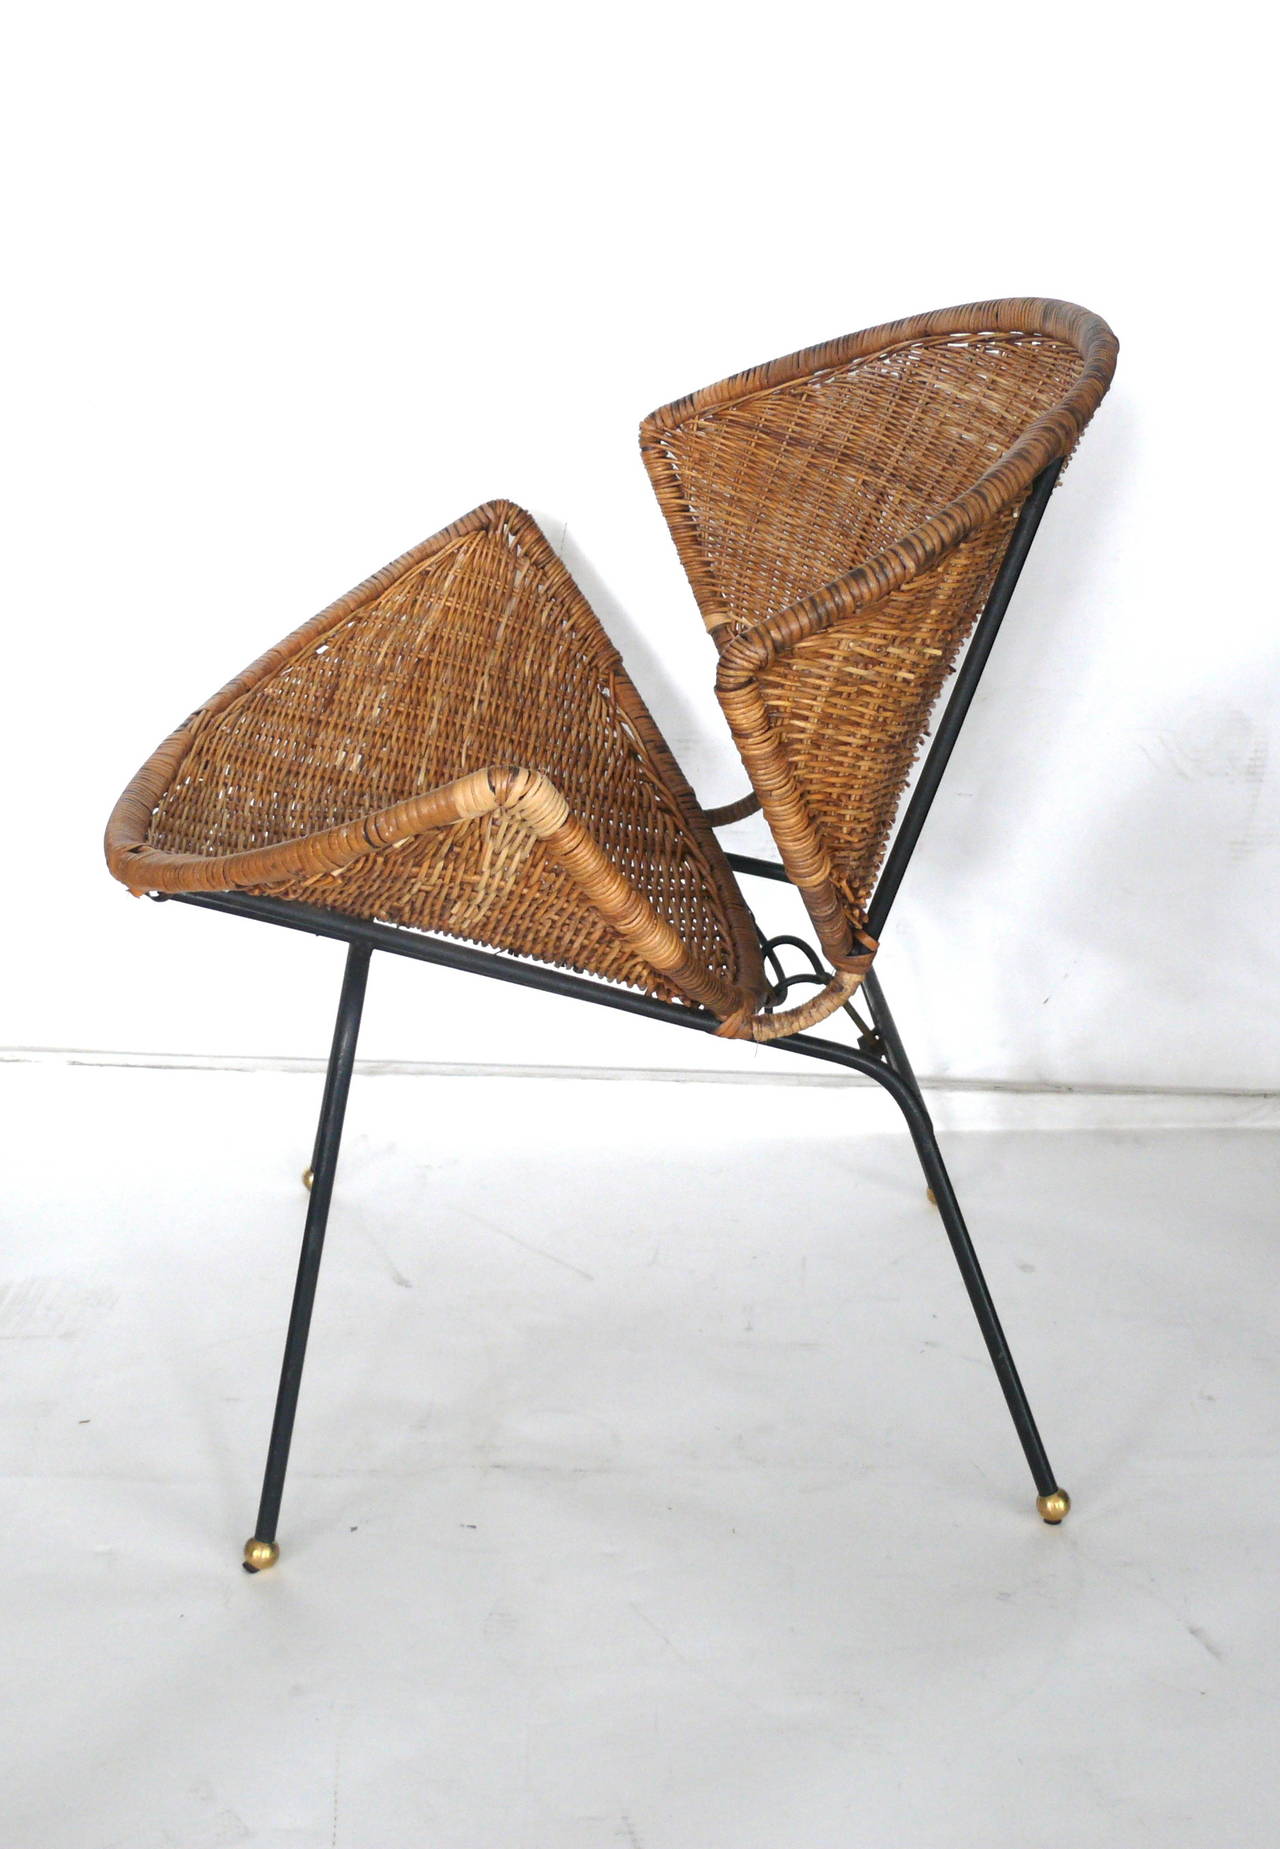 Brass Sculptural Wicker and Rattan Clam Chairs